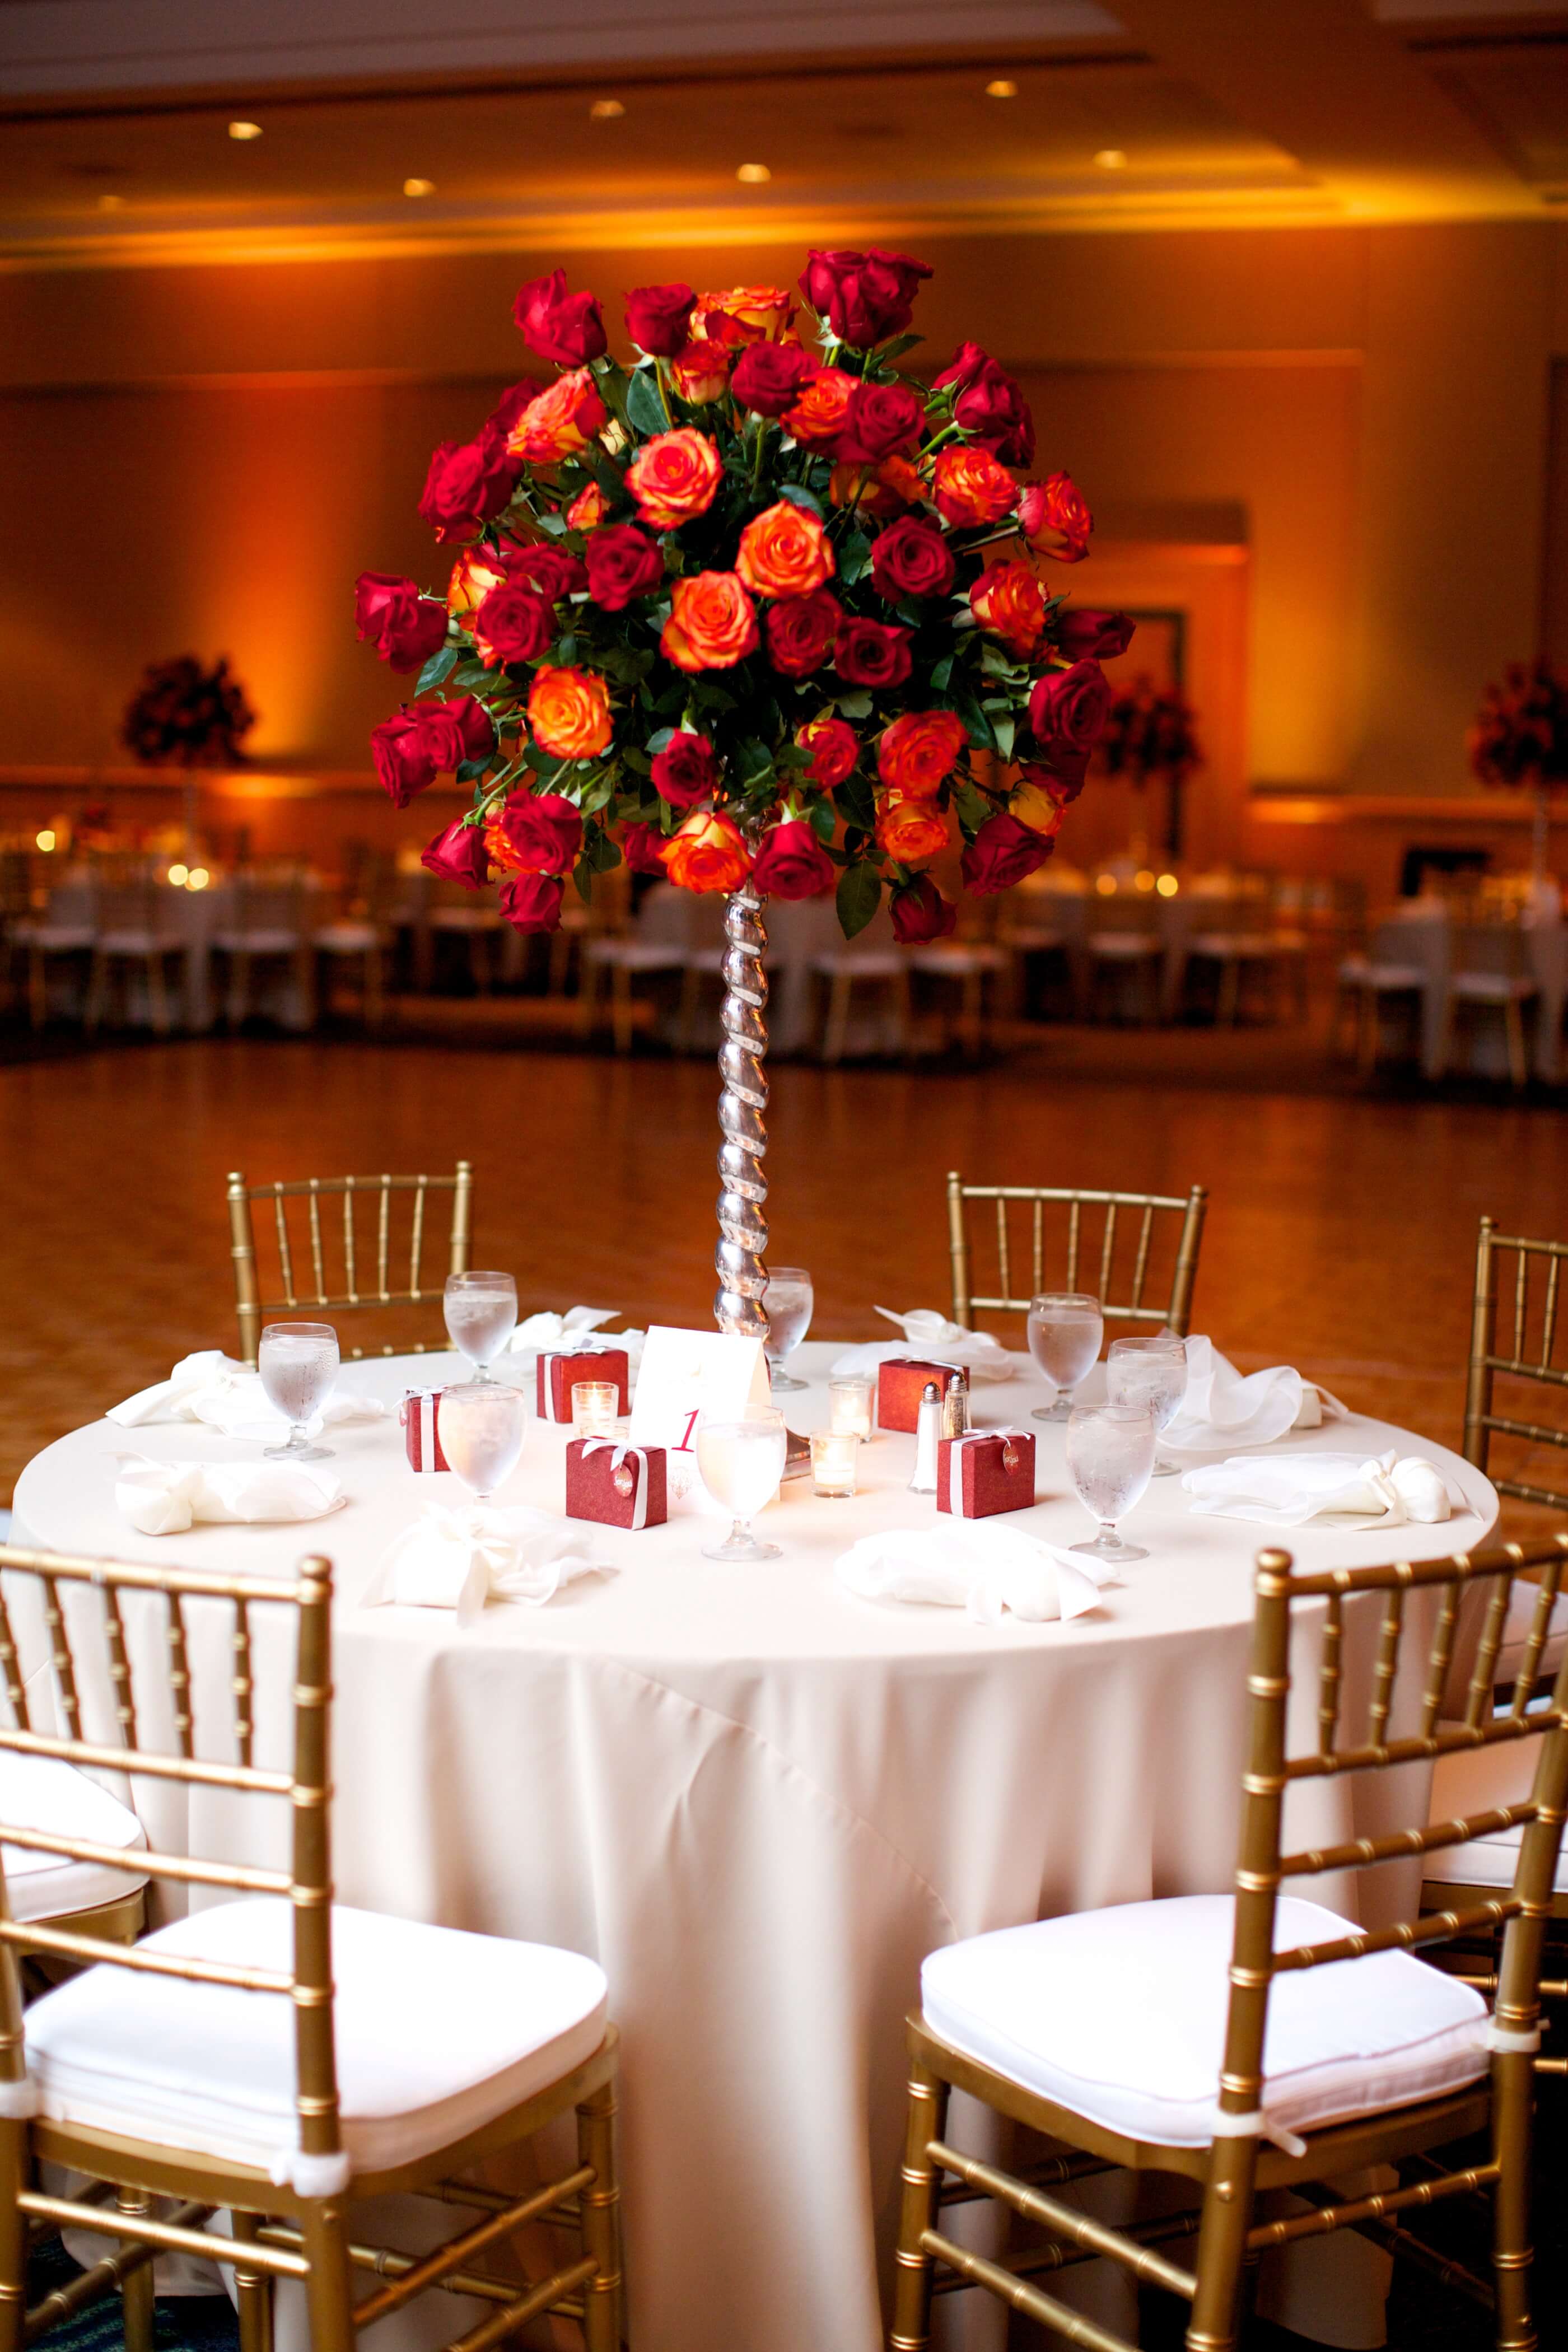 This warm red and orange uplighting created a cozy Fall environment. 